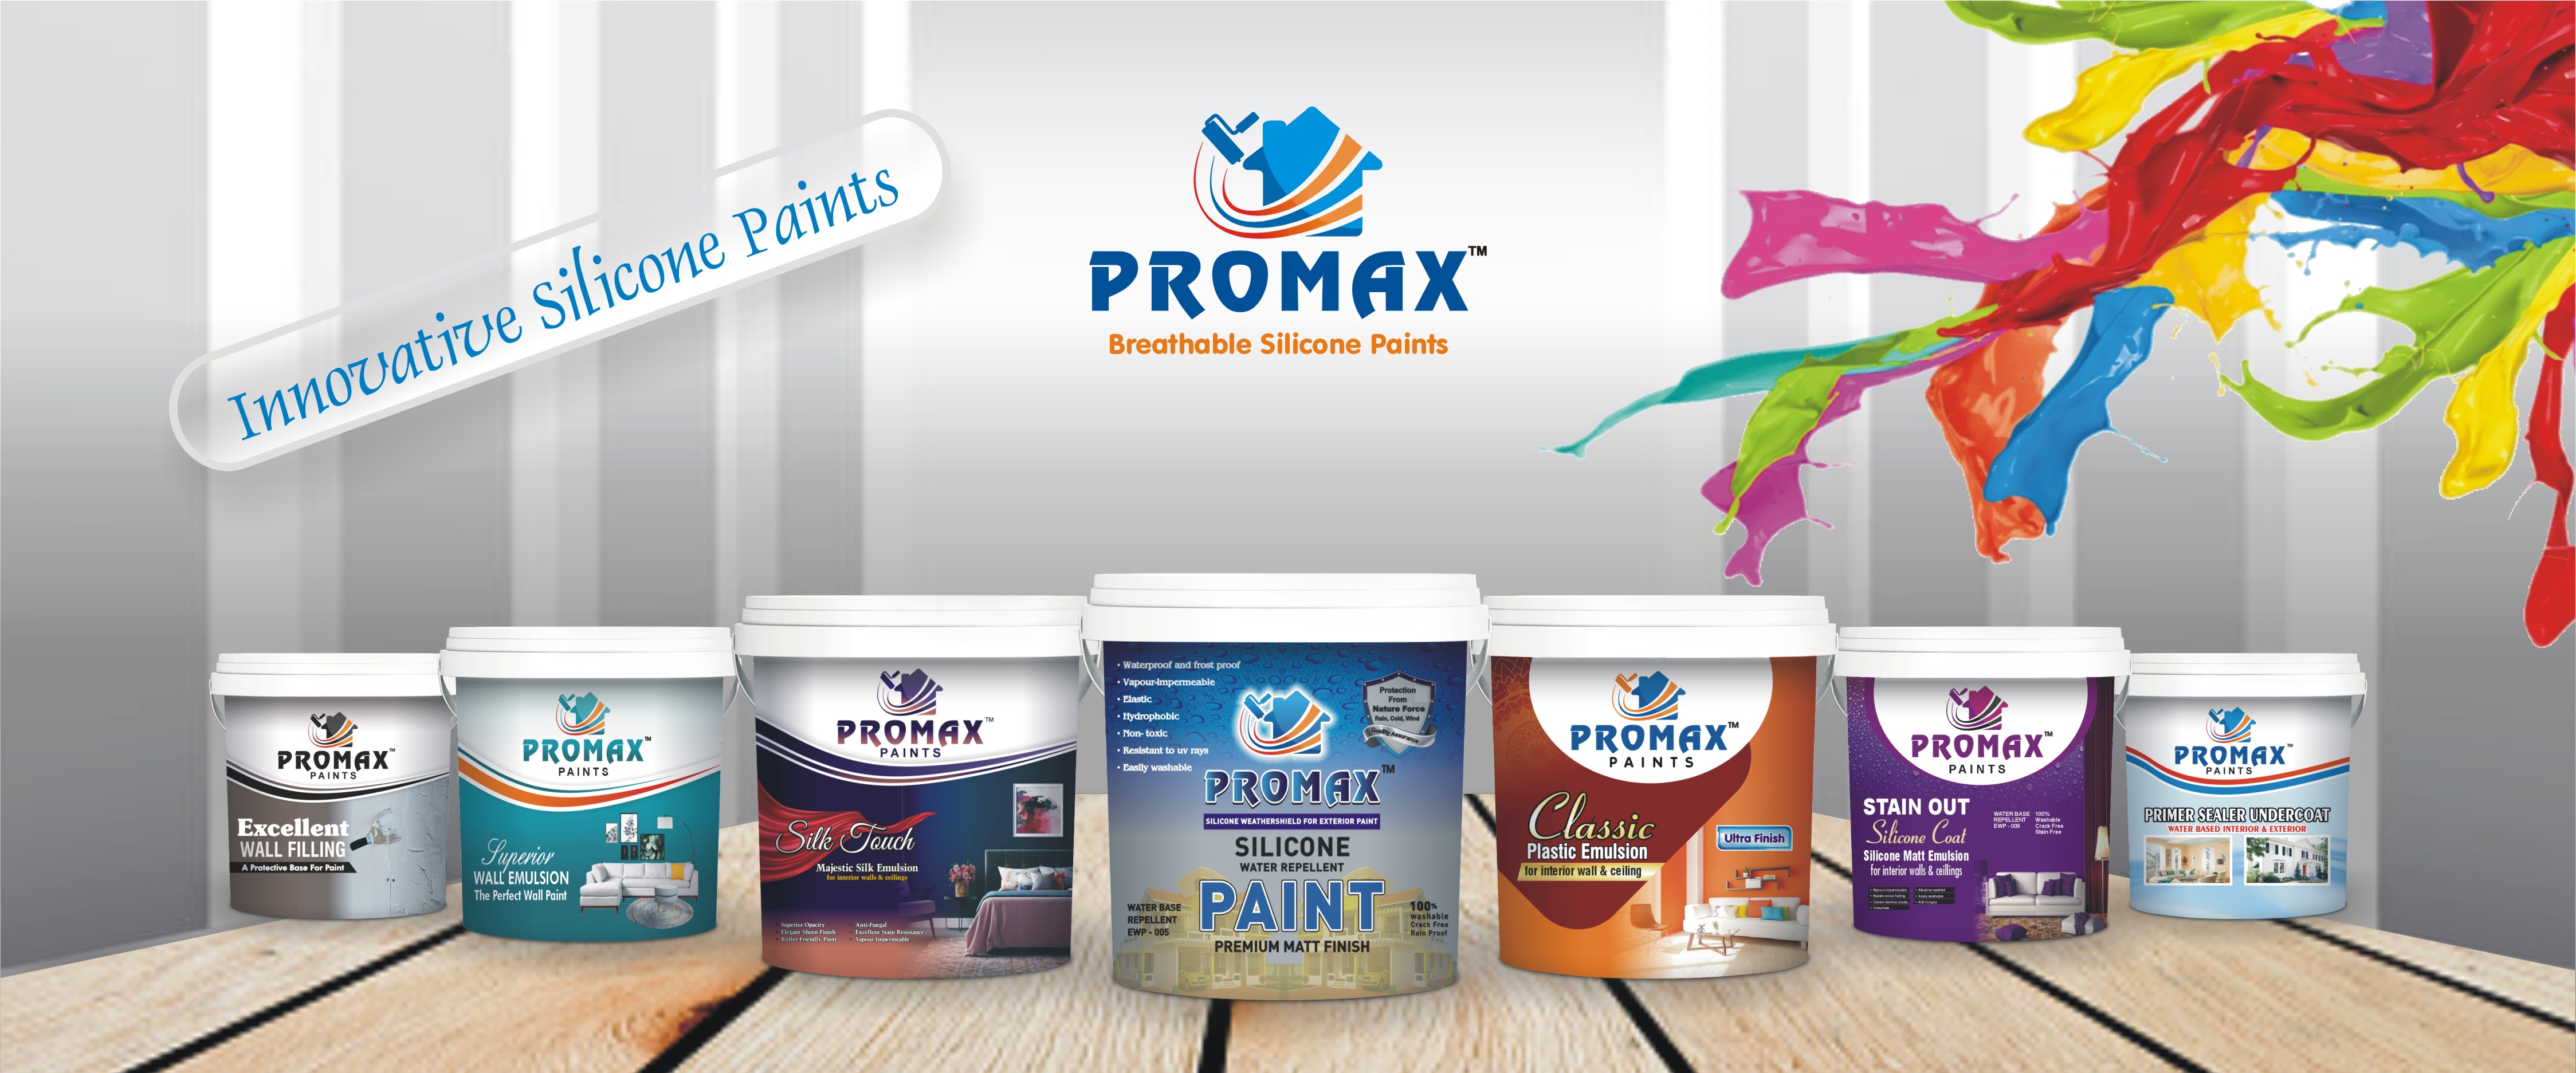 PROMAX-Innovative Silicone Paints